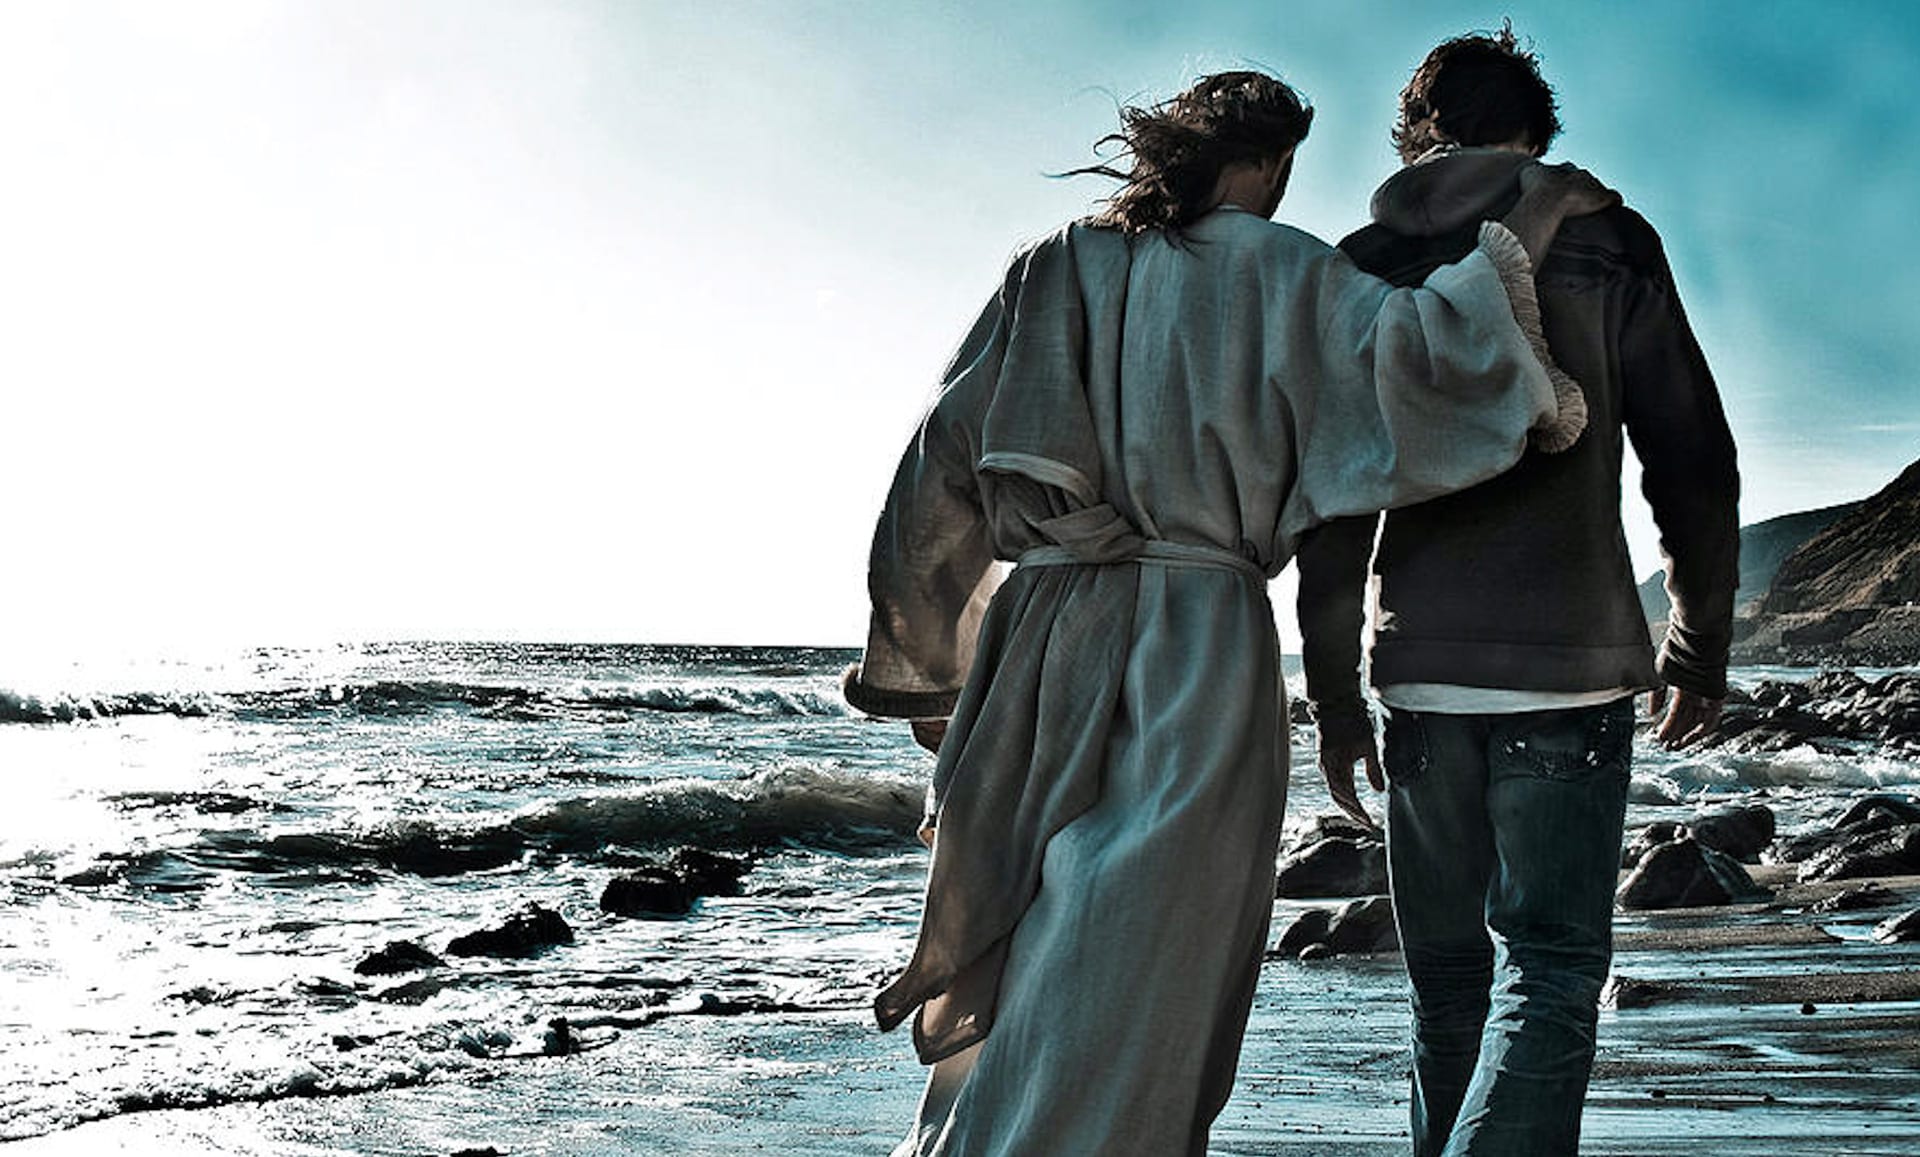 Jesus and Friend Walking on Beach with Jesus' arm over friends shoulder